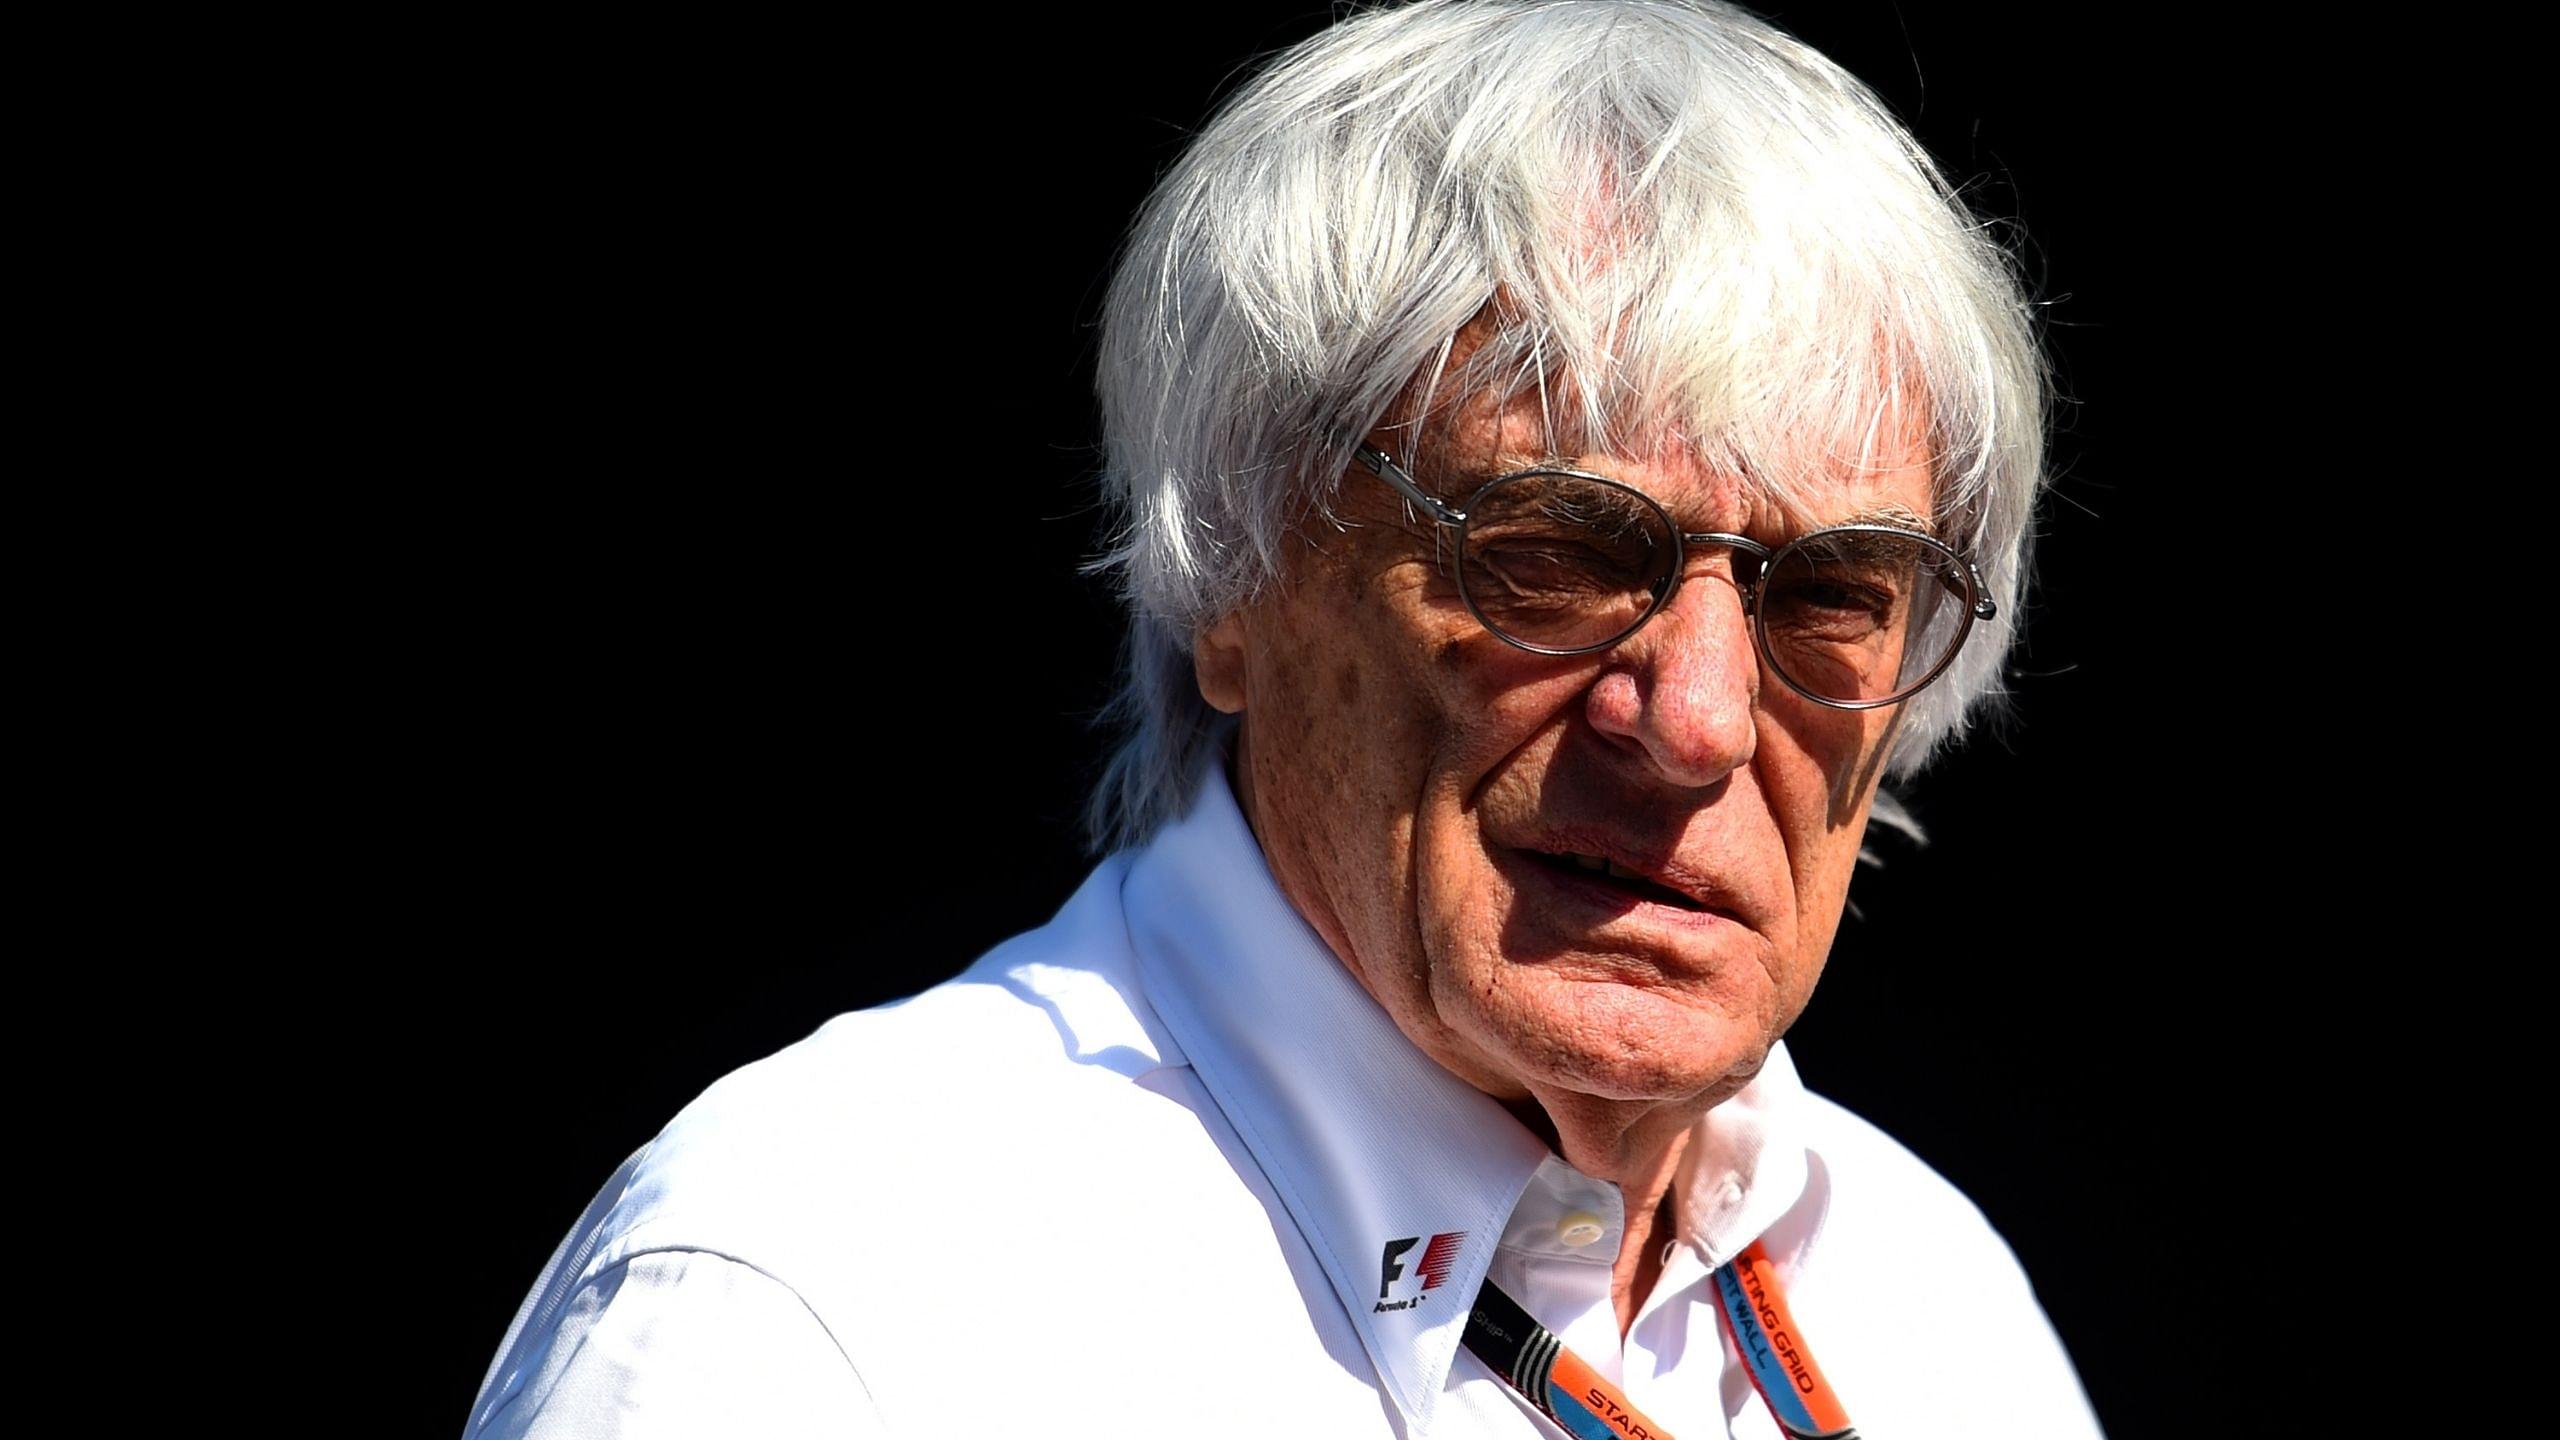 "That’s the only way to keep the tension high" - Former boss Bernie Ecclestone suggests unique format for F1 races this season